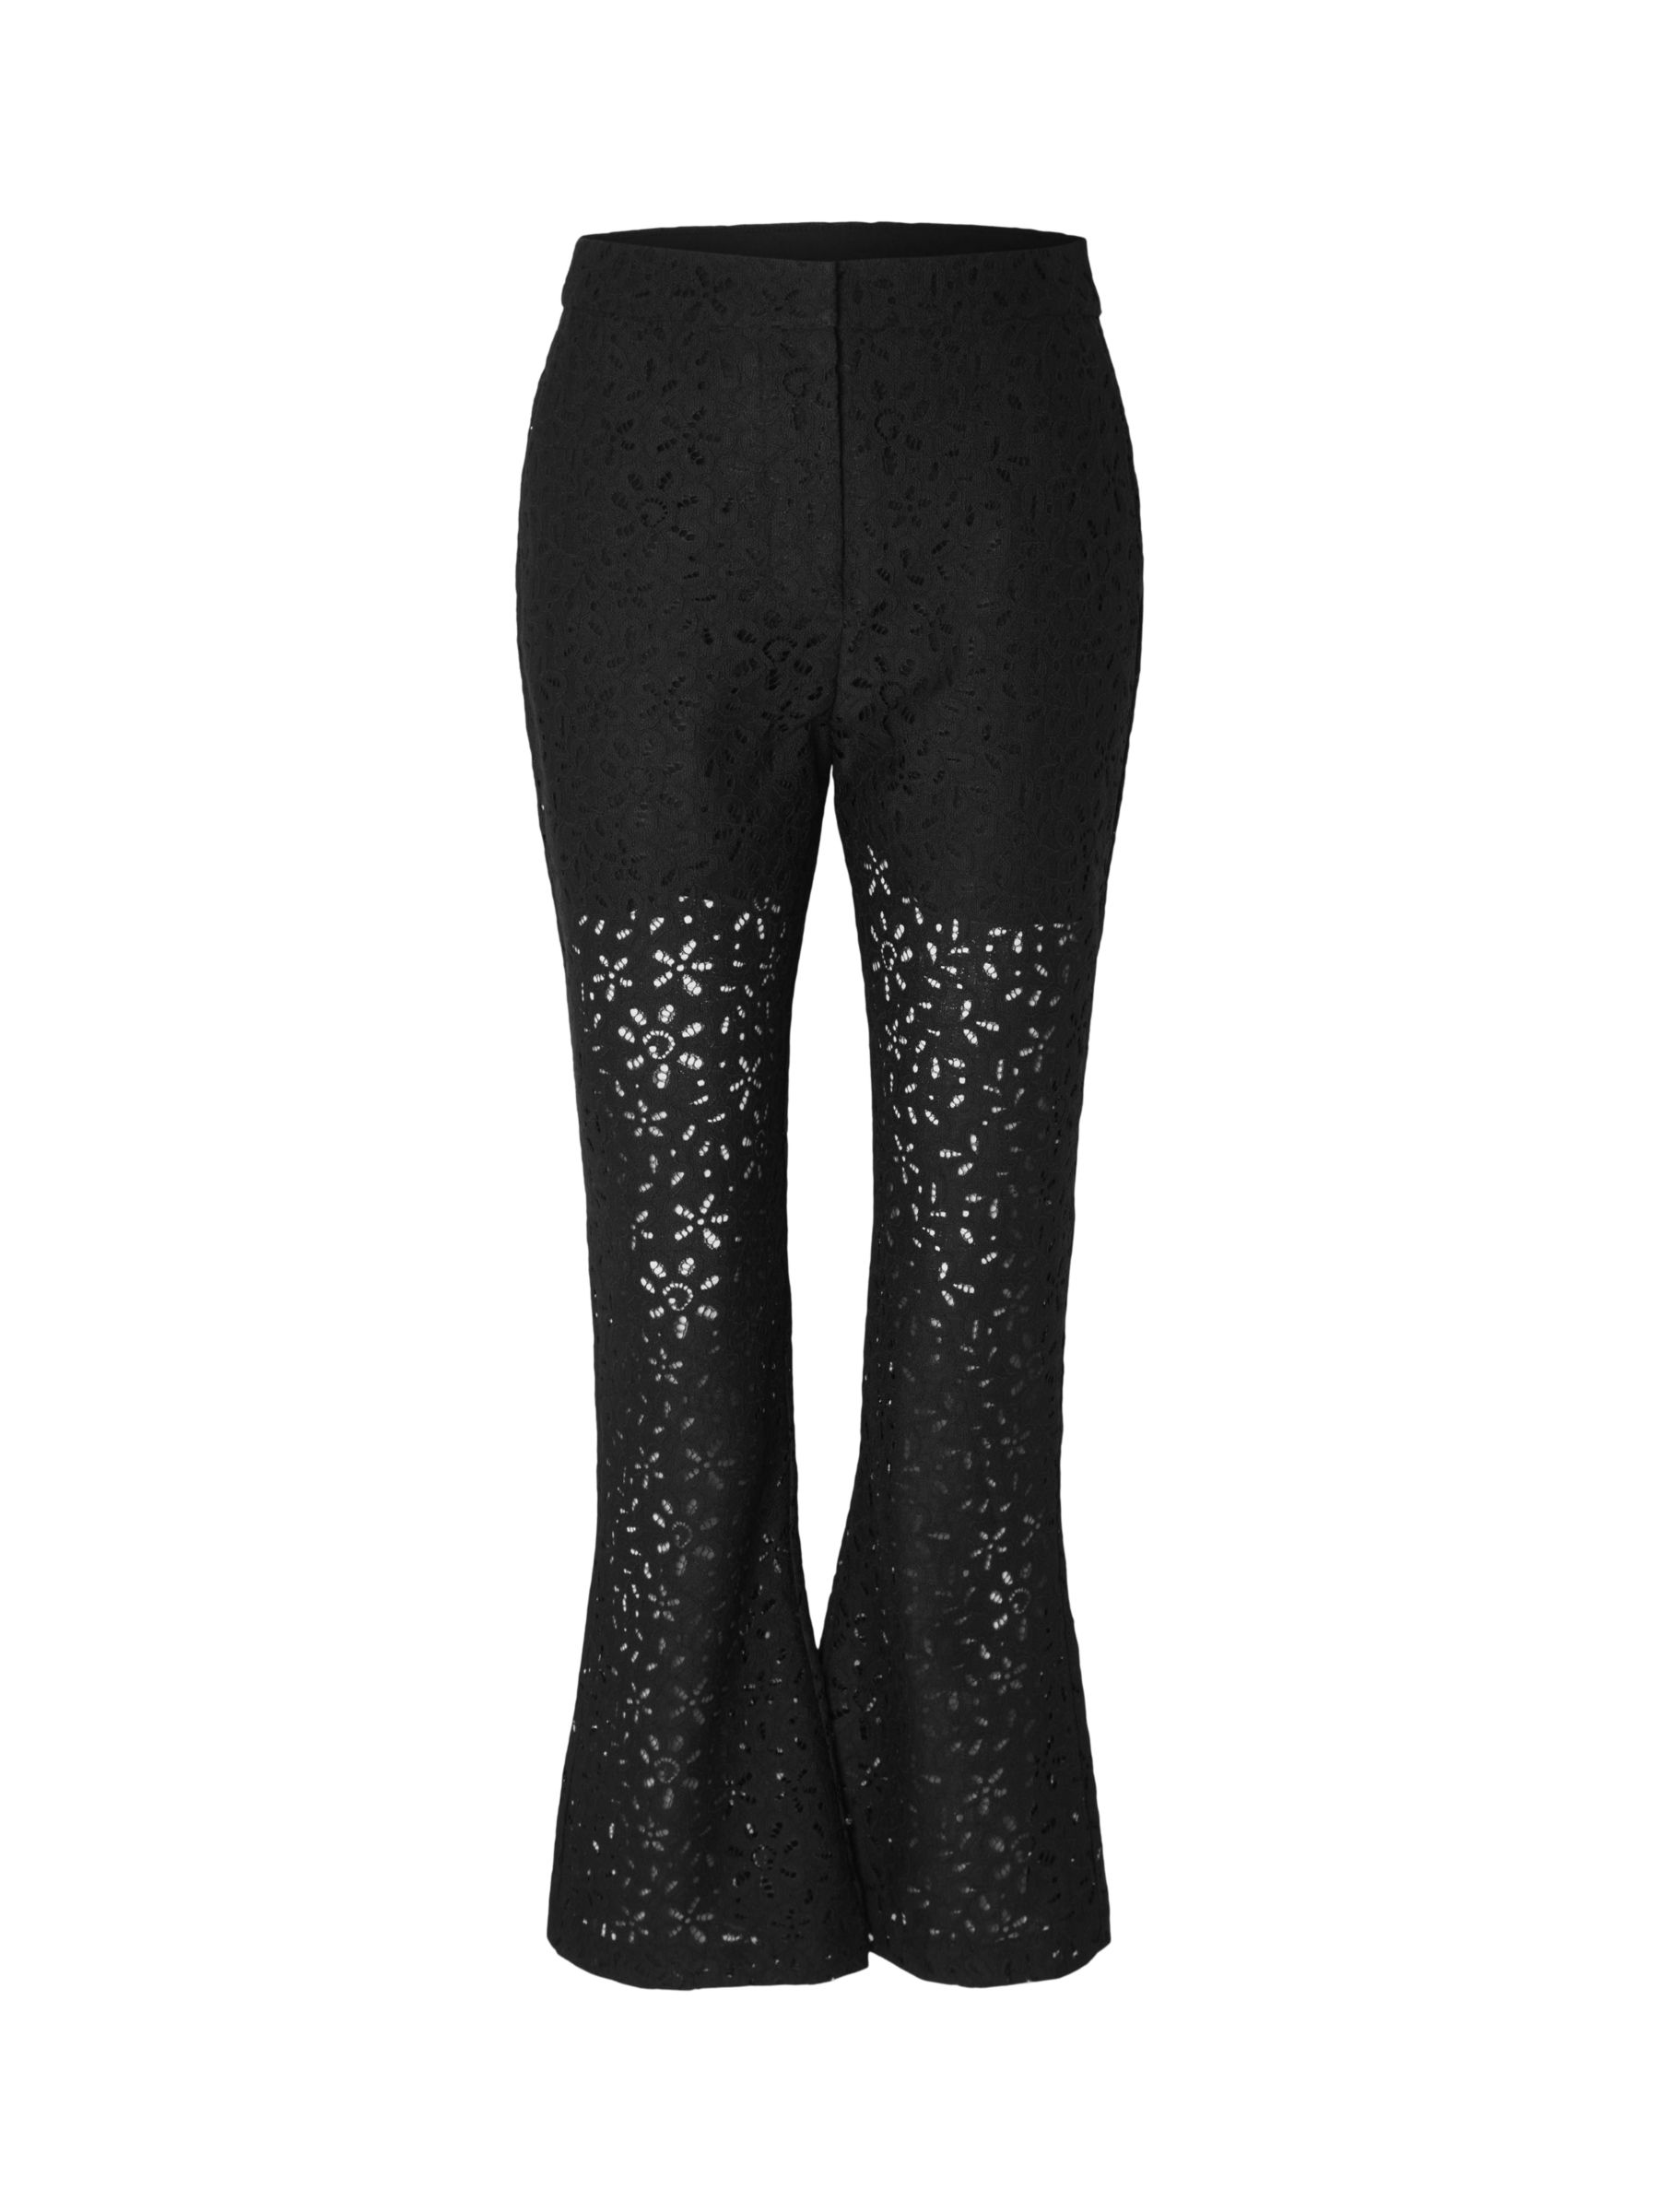 SELECTED FEMME Karola Lace Flared Trousers, Black, 34